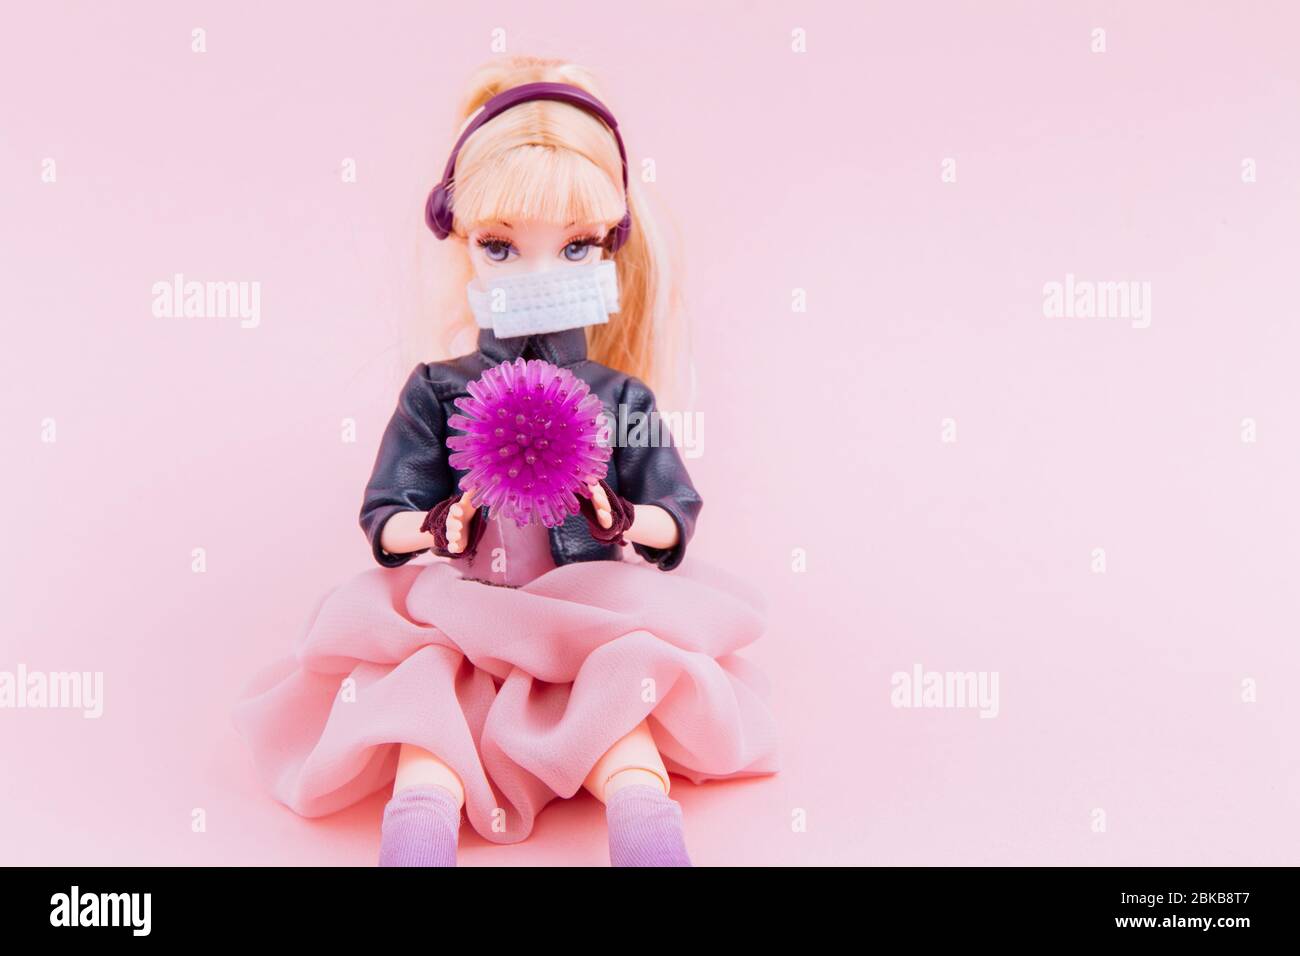 Sick Doll High Resolution Stock Photography and Images - Alamy